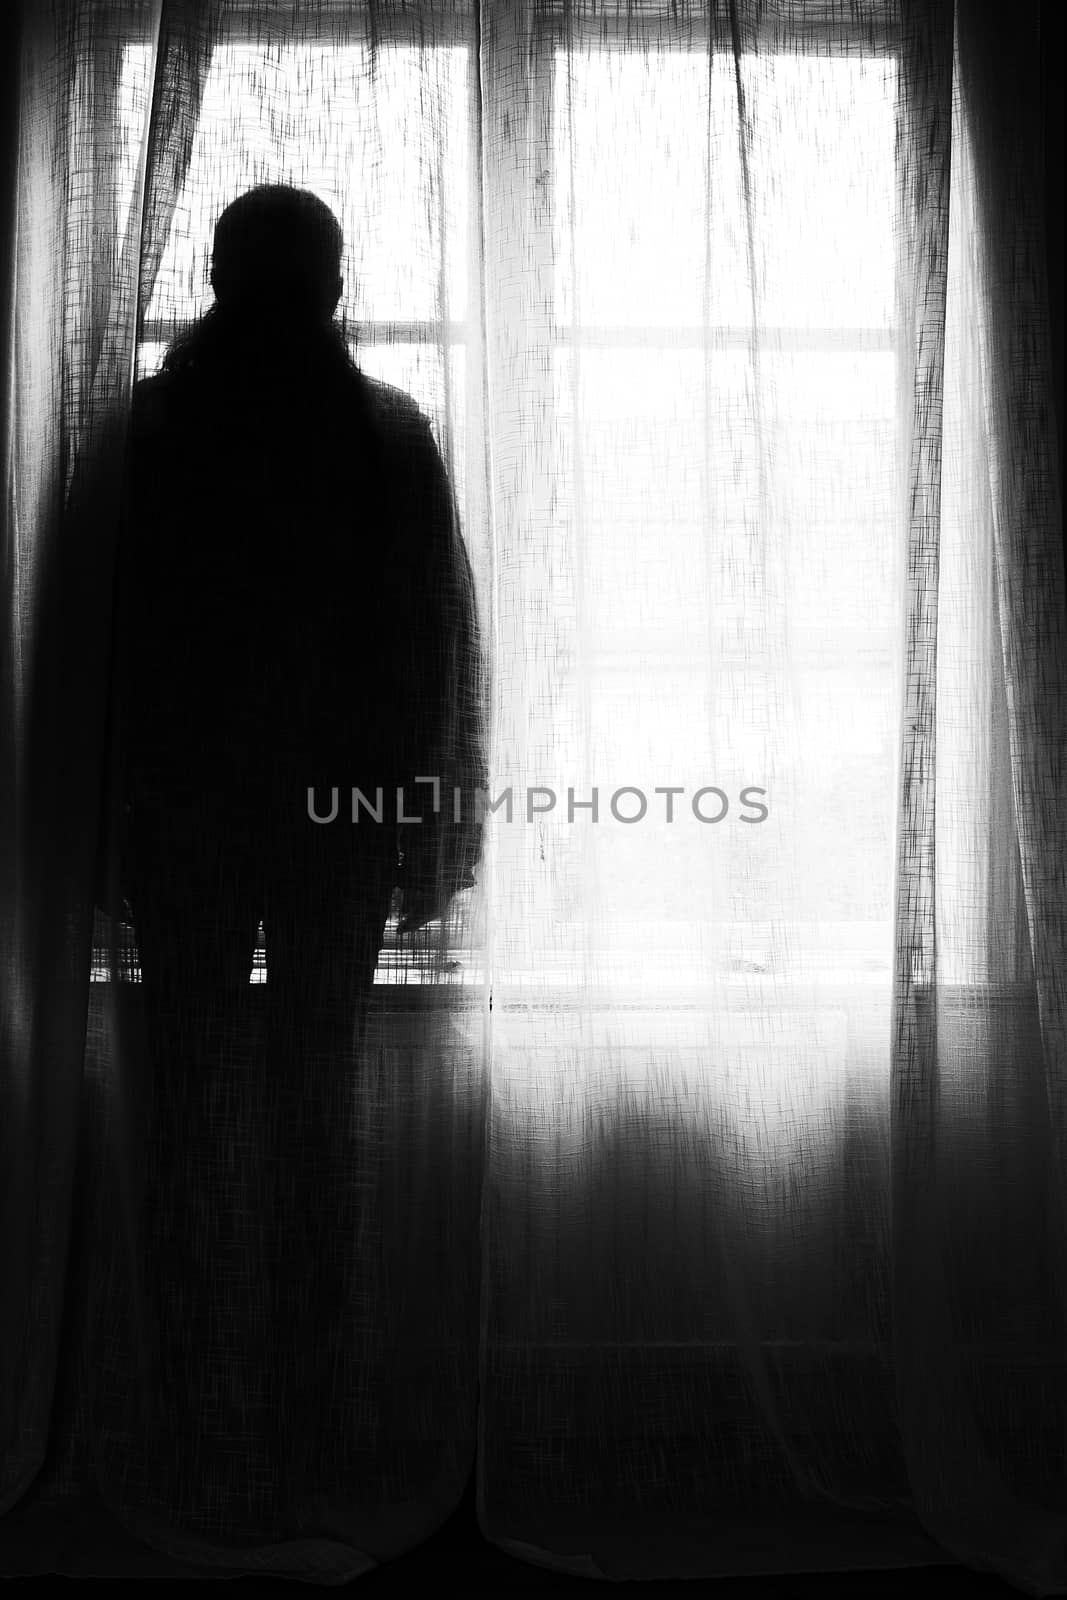 Sillhouette of a person standing in front of a window.